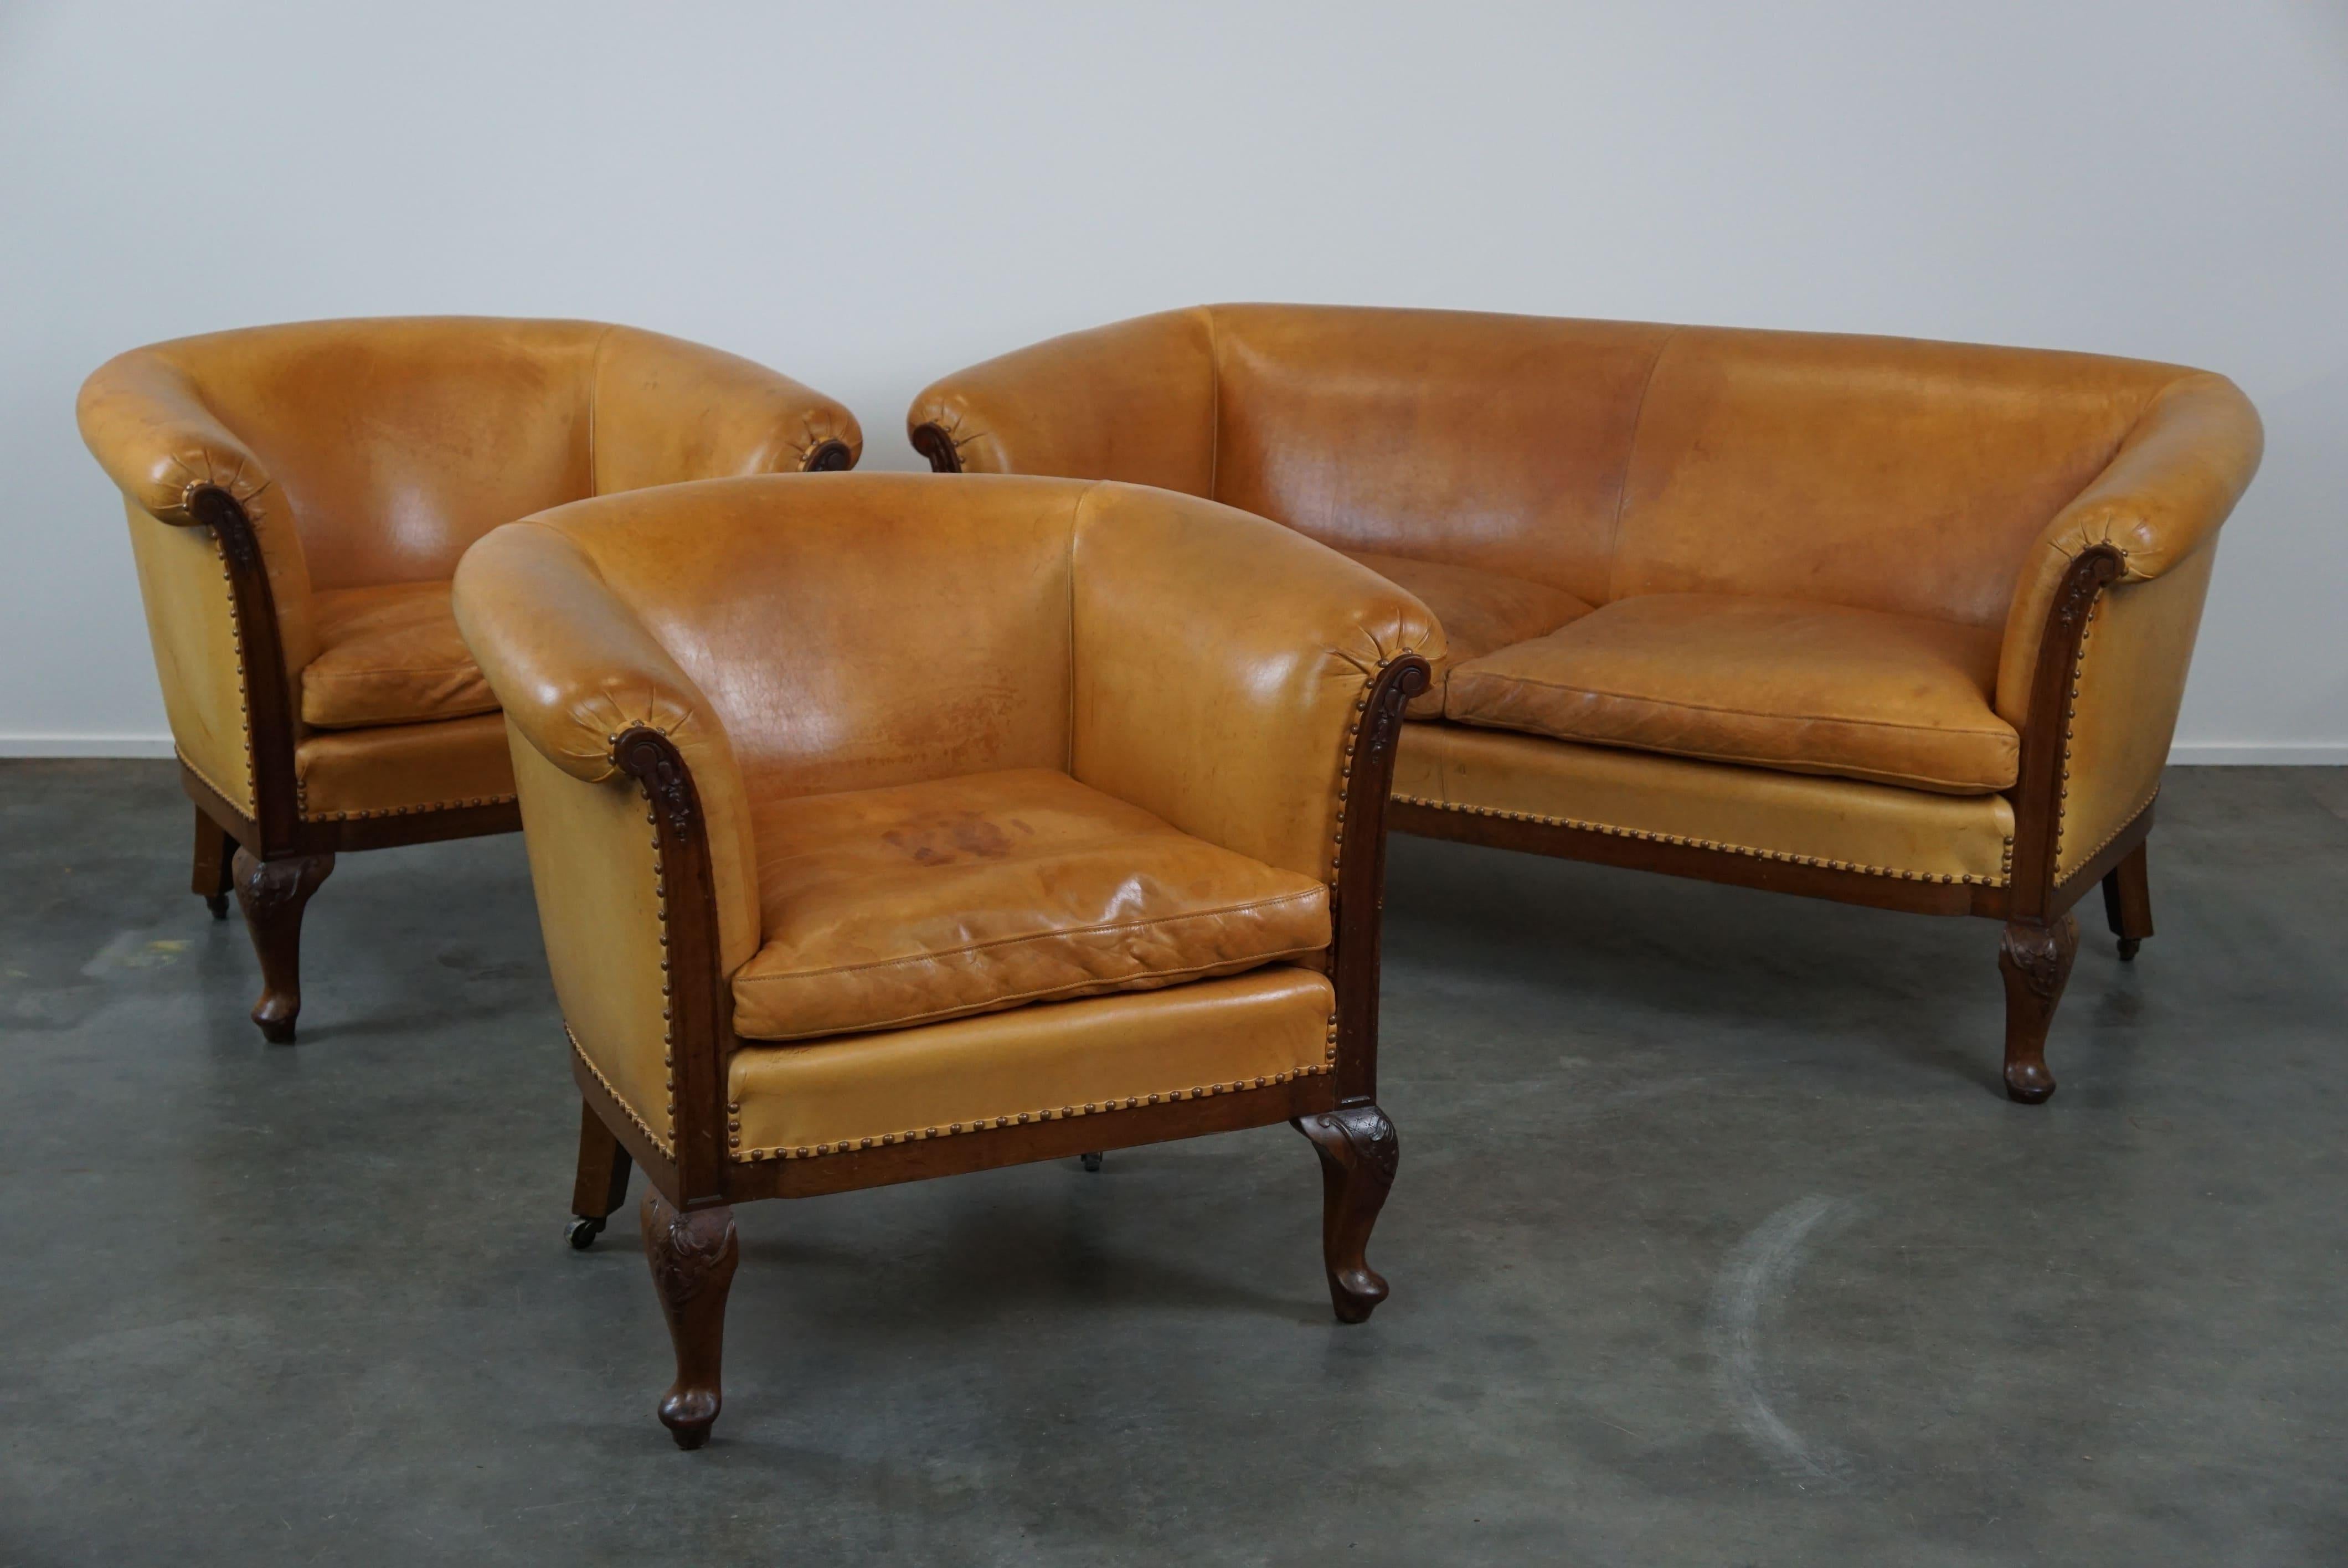 Offered: this unique old set of 2 club armchairs and a sofa in cognac-colored leather, featuring wood carvings, Queen Anne legs, and wheels on the back legs.

A unique opportunity for enthusiasts! Want a complete set? Then we have it here! This